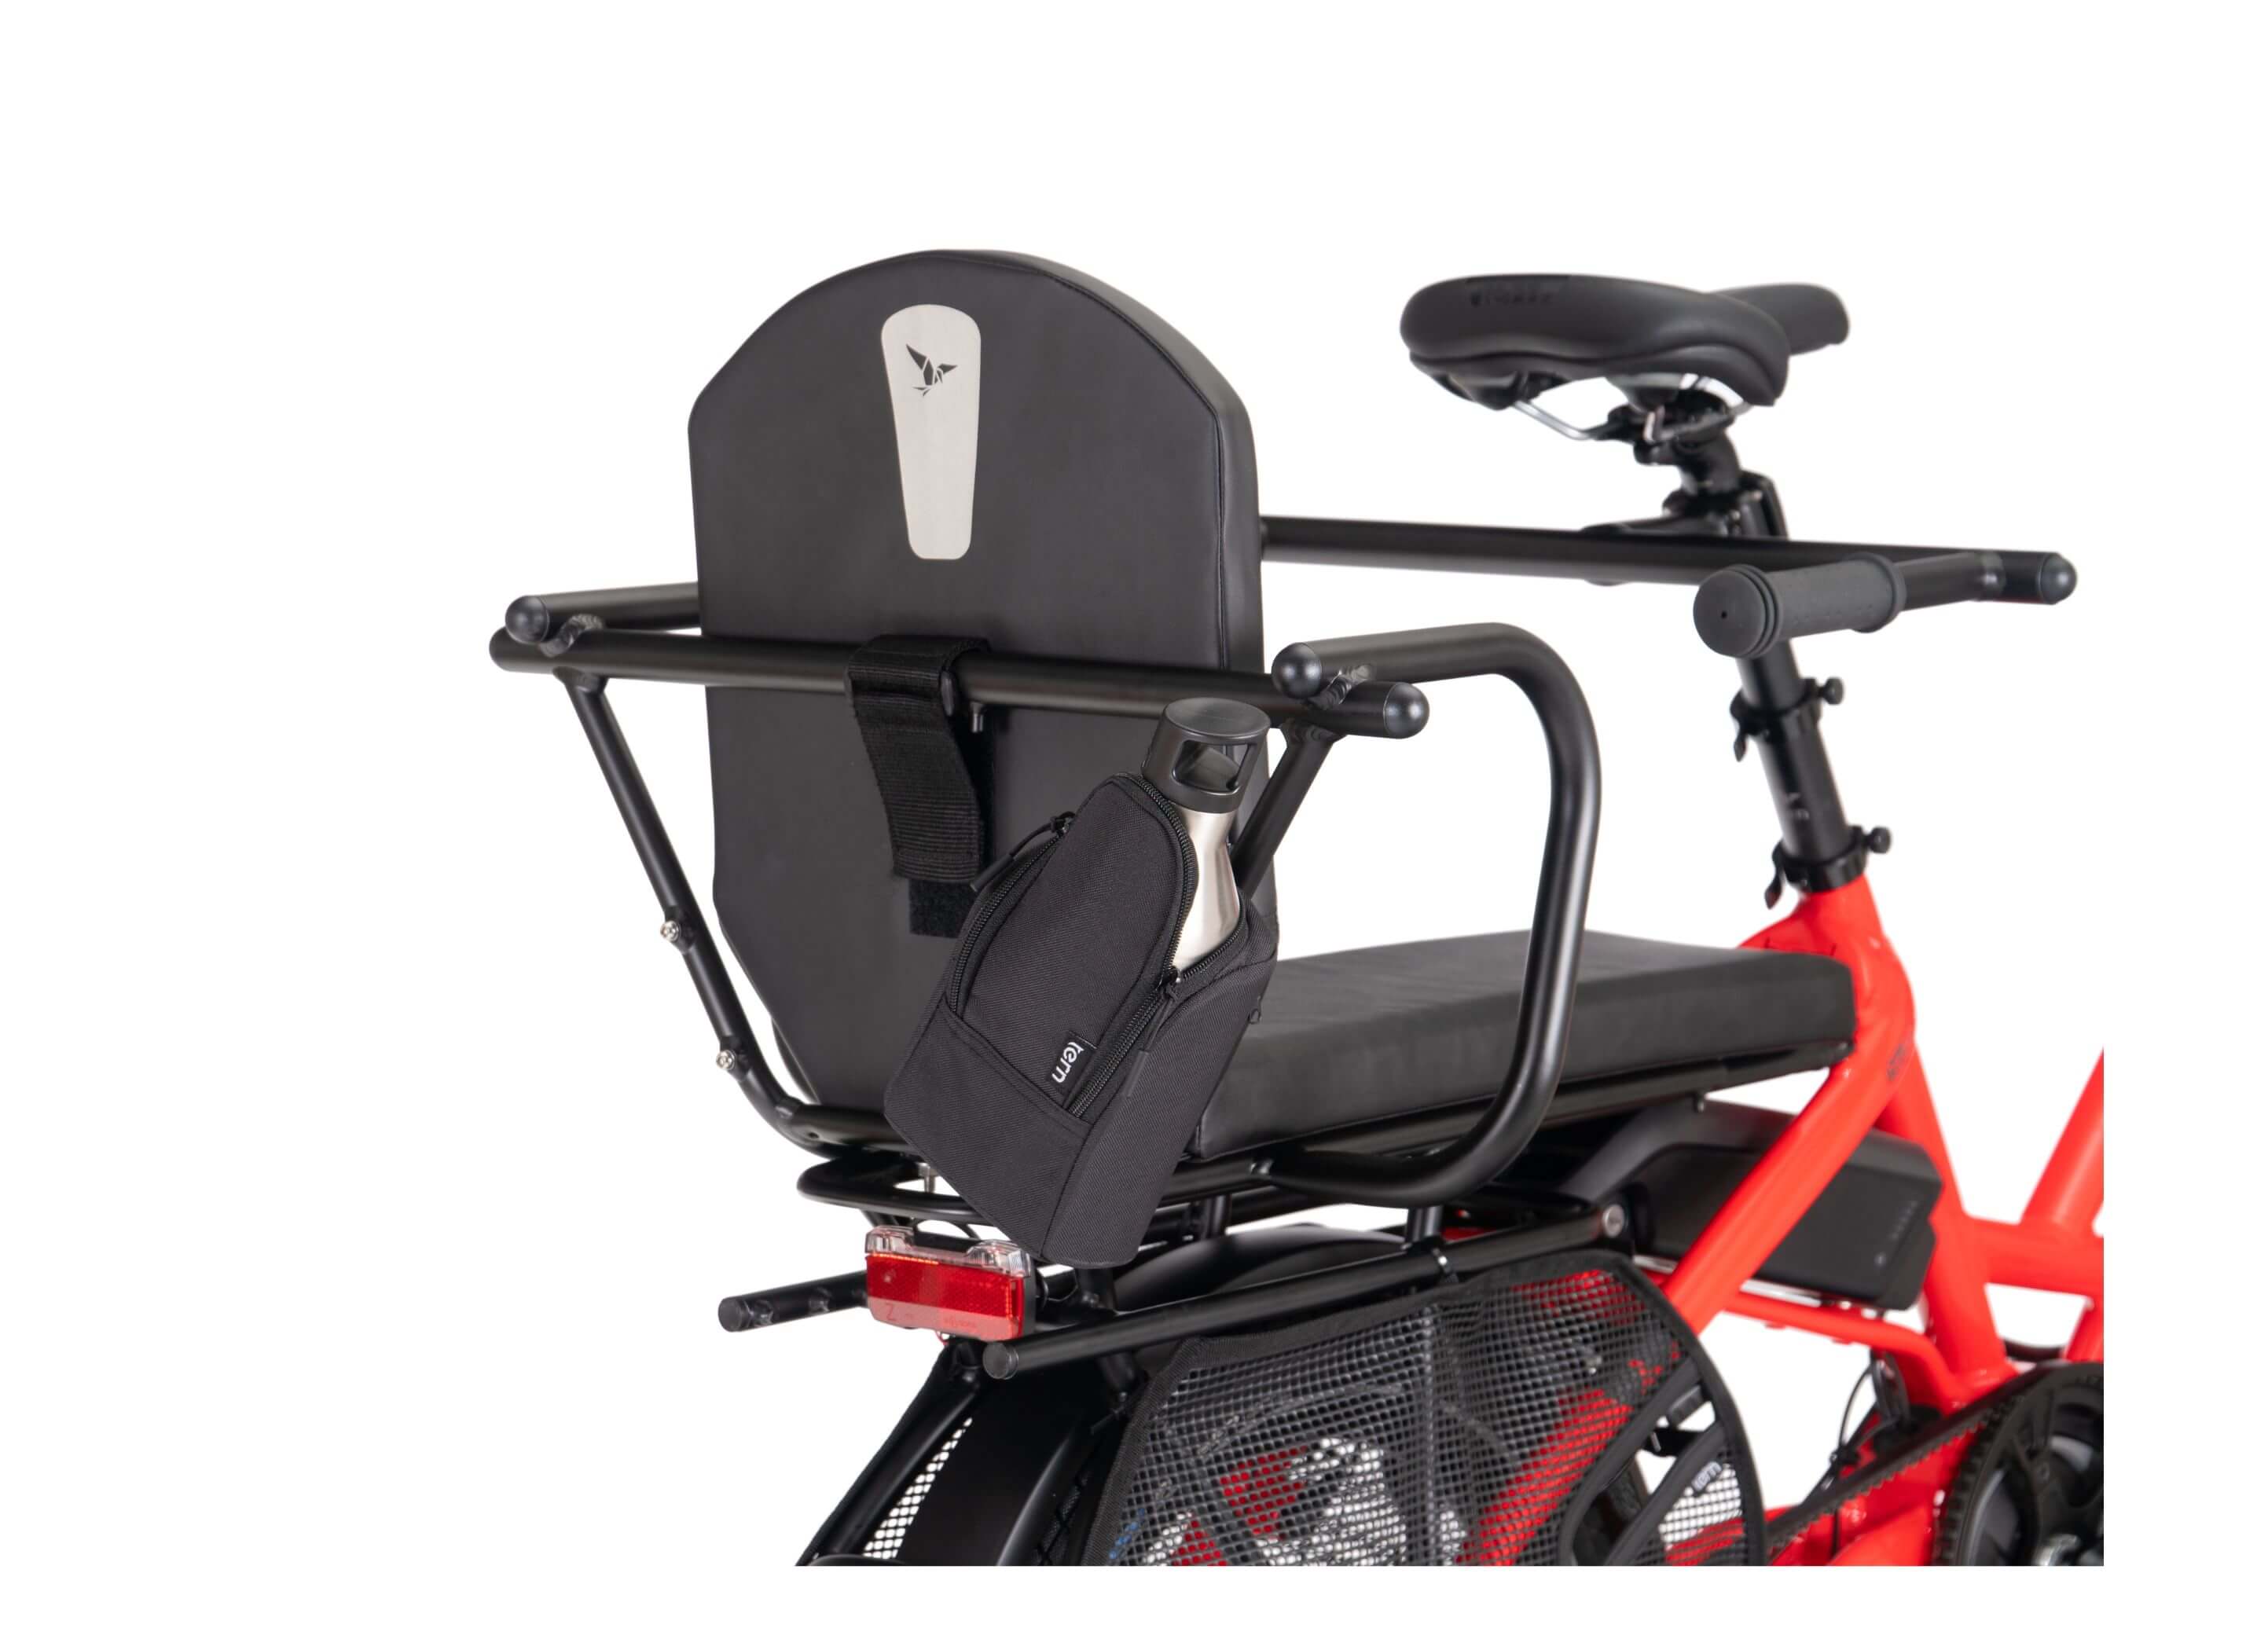 Tern RidePouch Bicycle Bag